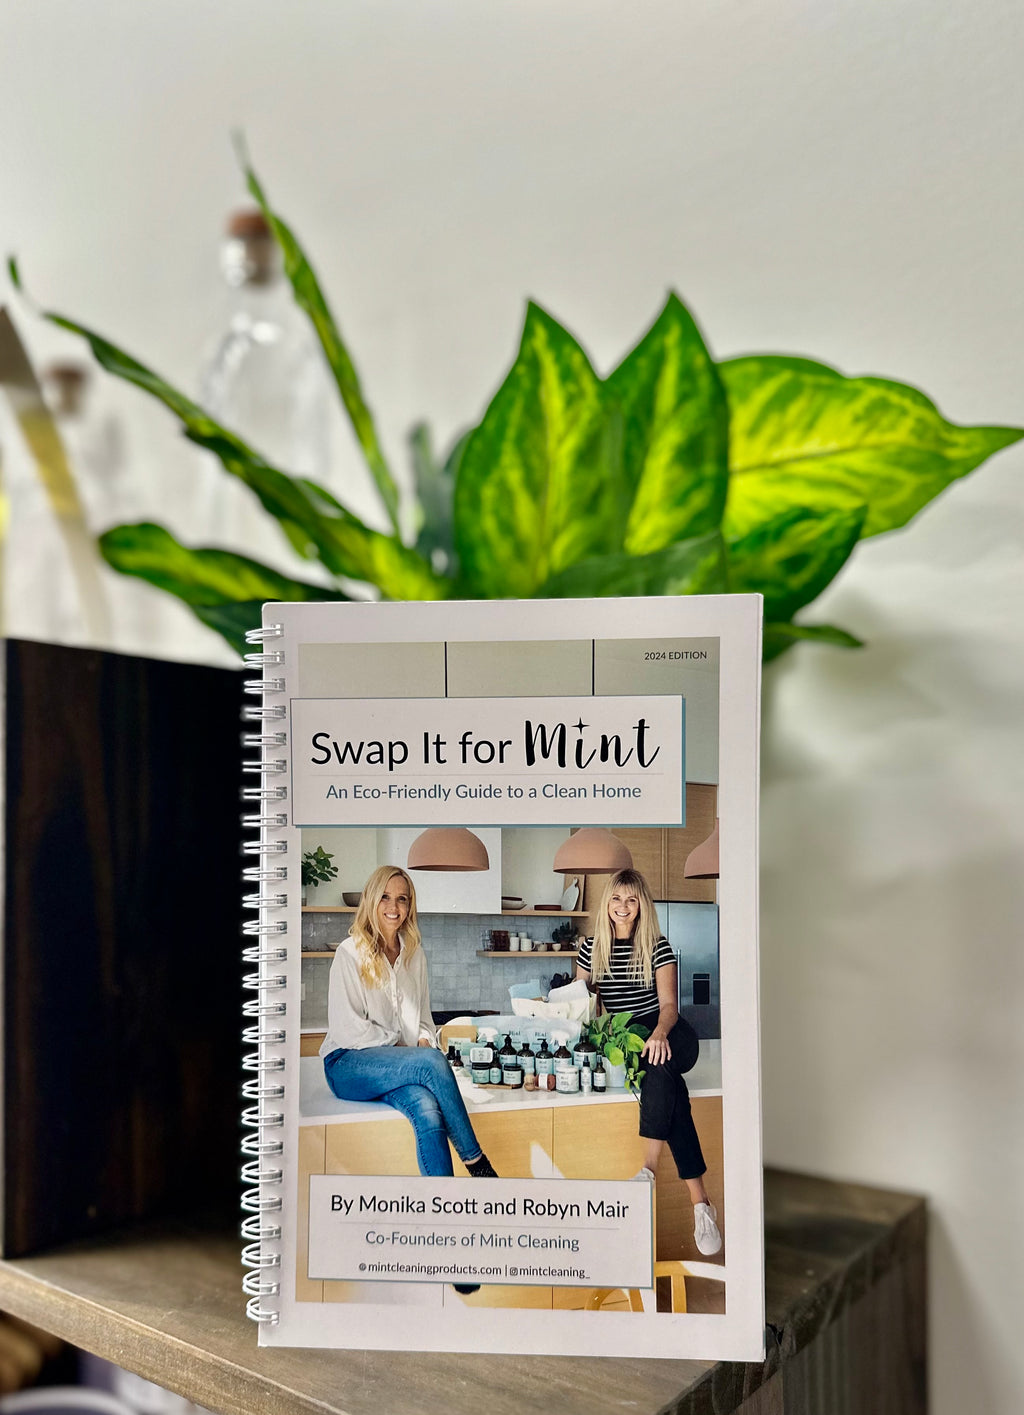 Mint Cleaning Book- Swap It For Mint "An Eco-Friendly Guide to a Clean Home"